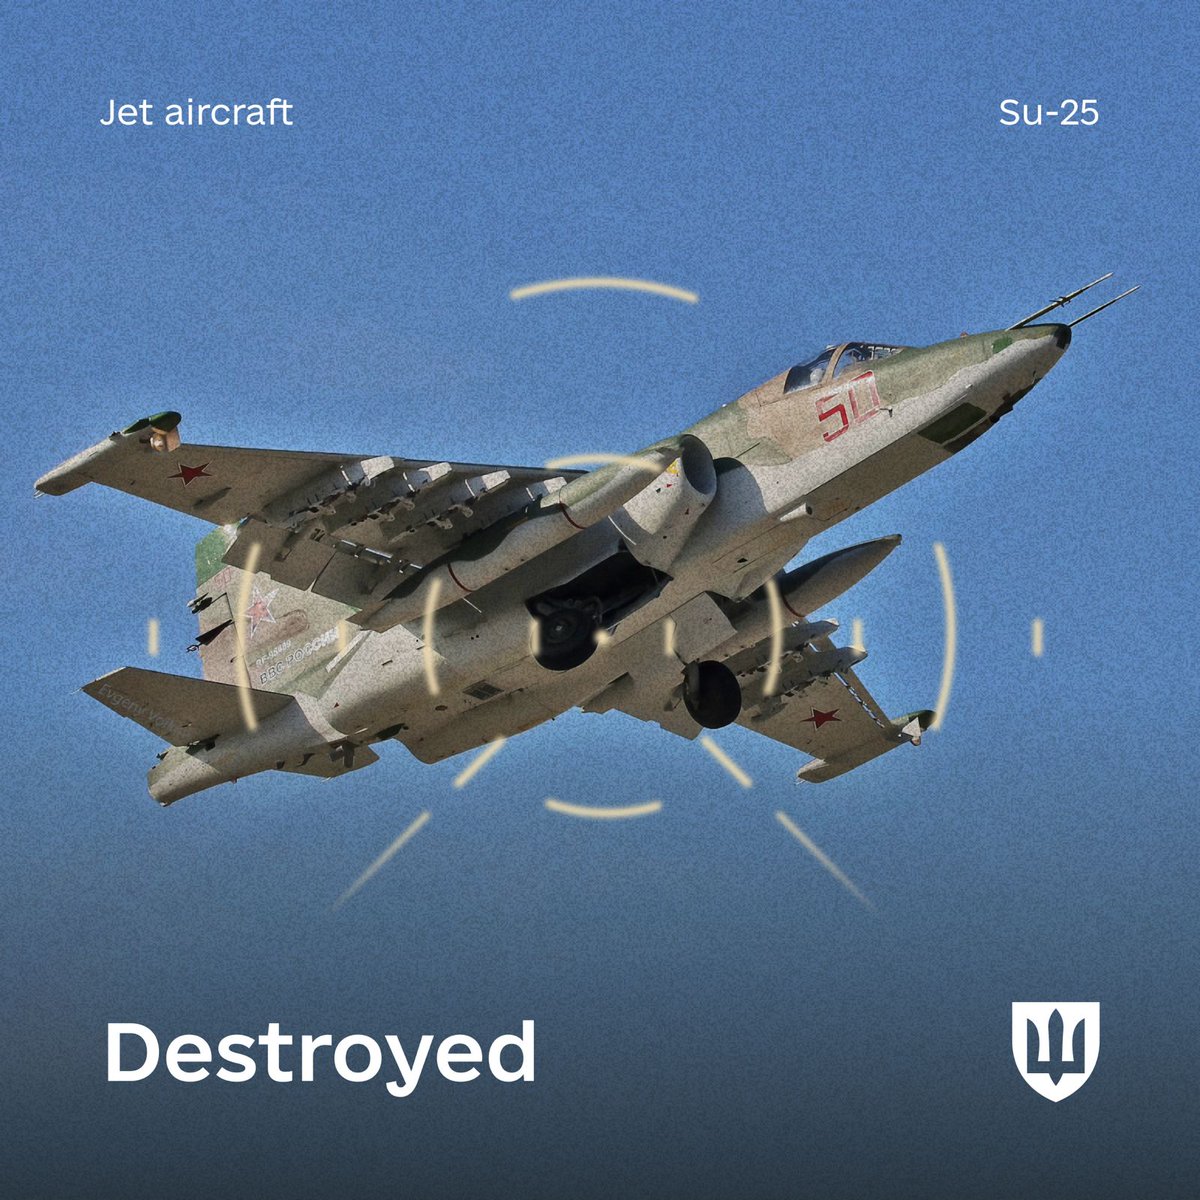 Another one!
Ukrainian warriors destroyed a russian Su-25 jet in the Donetsk region.
There is no place for russian scrap metal in Ukrainian skies.